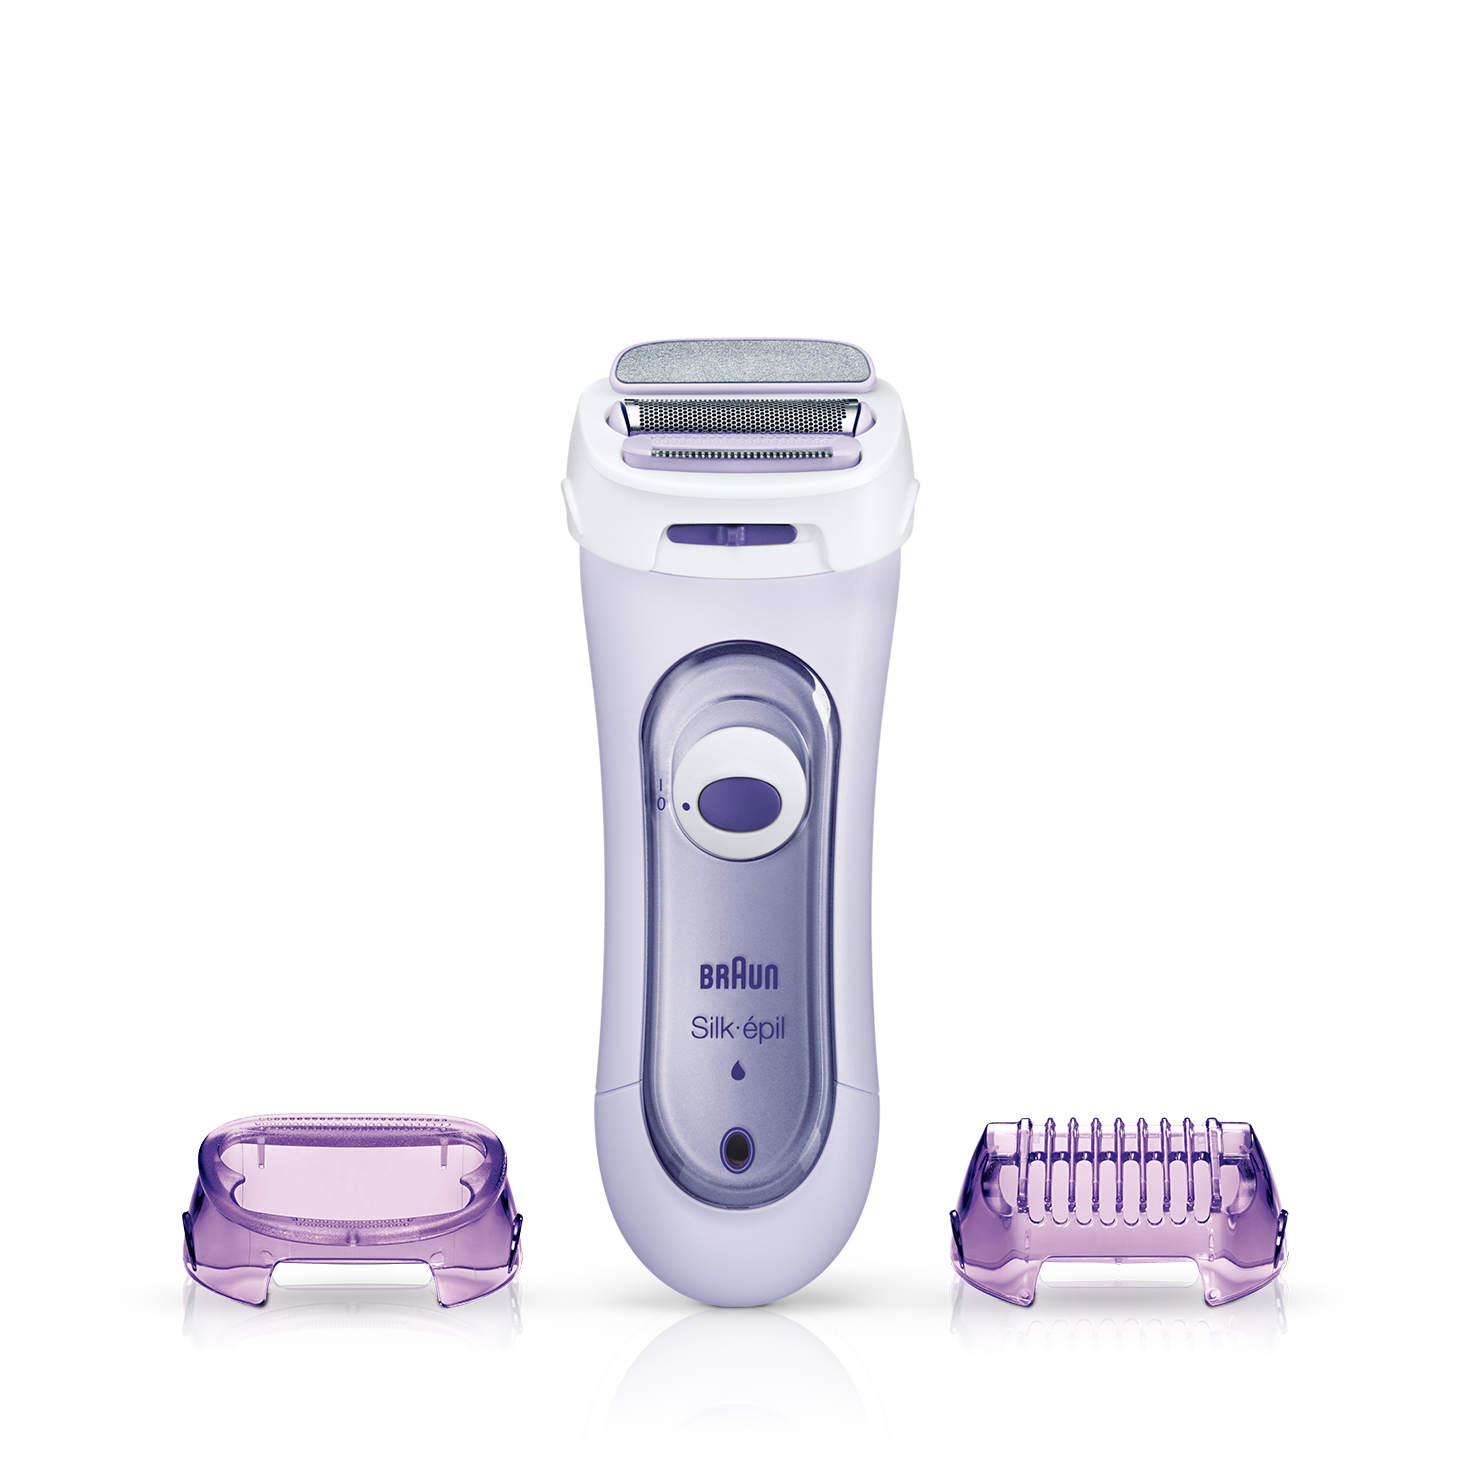 Braun Lady Shaver - 5560 Cordless Electric Shaver including Exfoliation Attachment